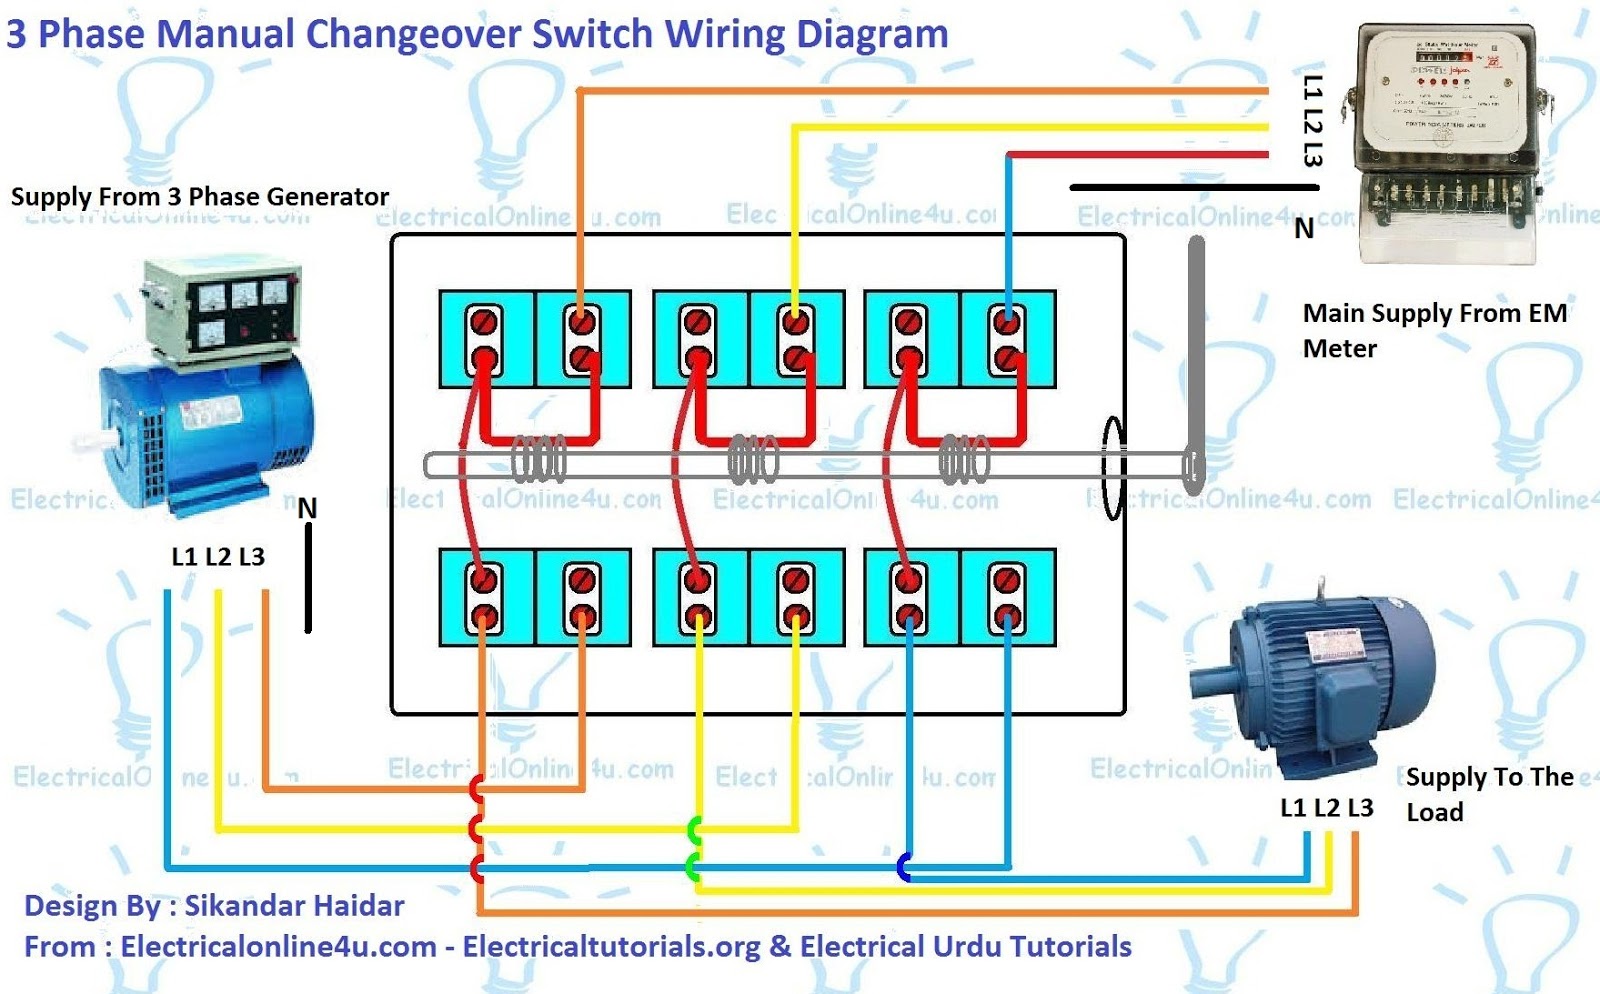 110/220-volt single phase on/off switch wiring diagram